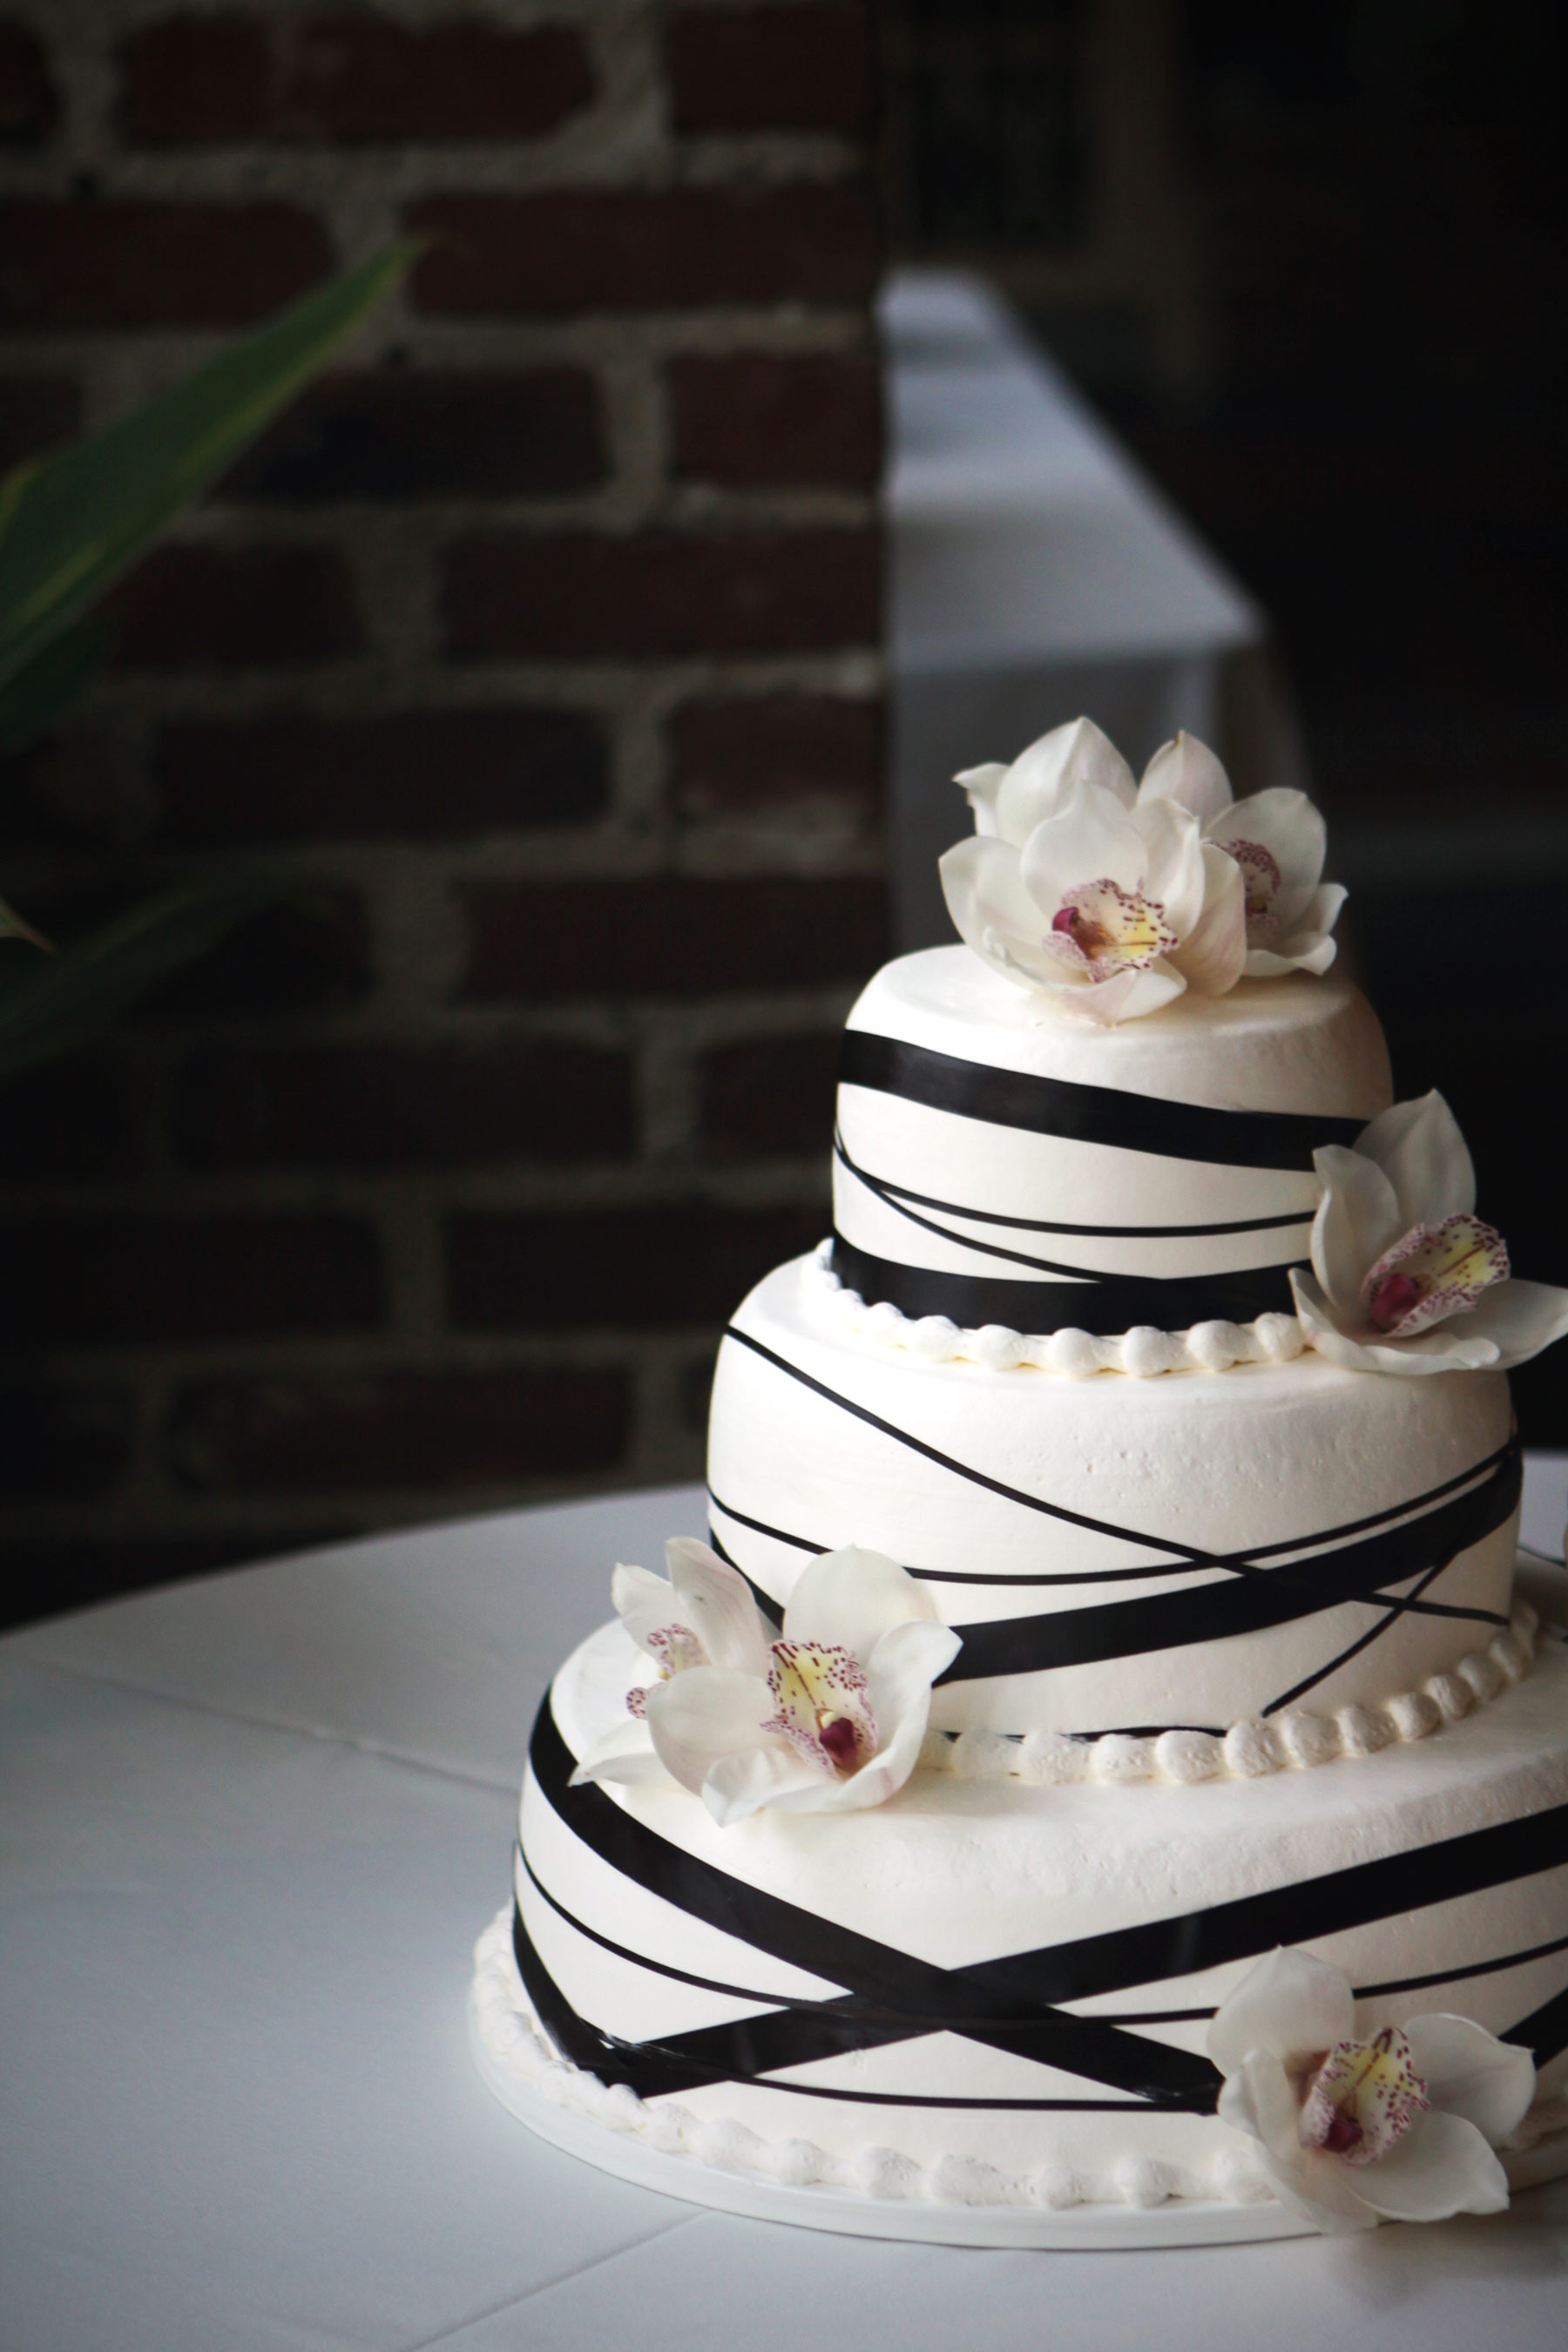 Ribbons for Wedding Cakes 20 Of the Best Ideas for Beautiful Wedding Cake Archives Patty S Cakes and